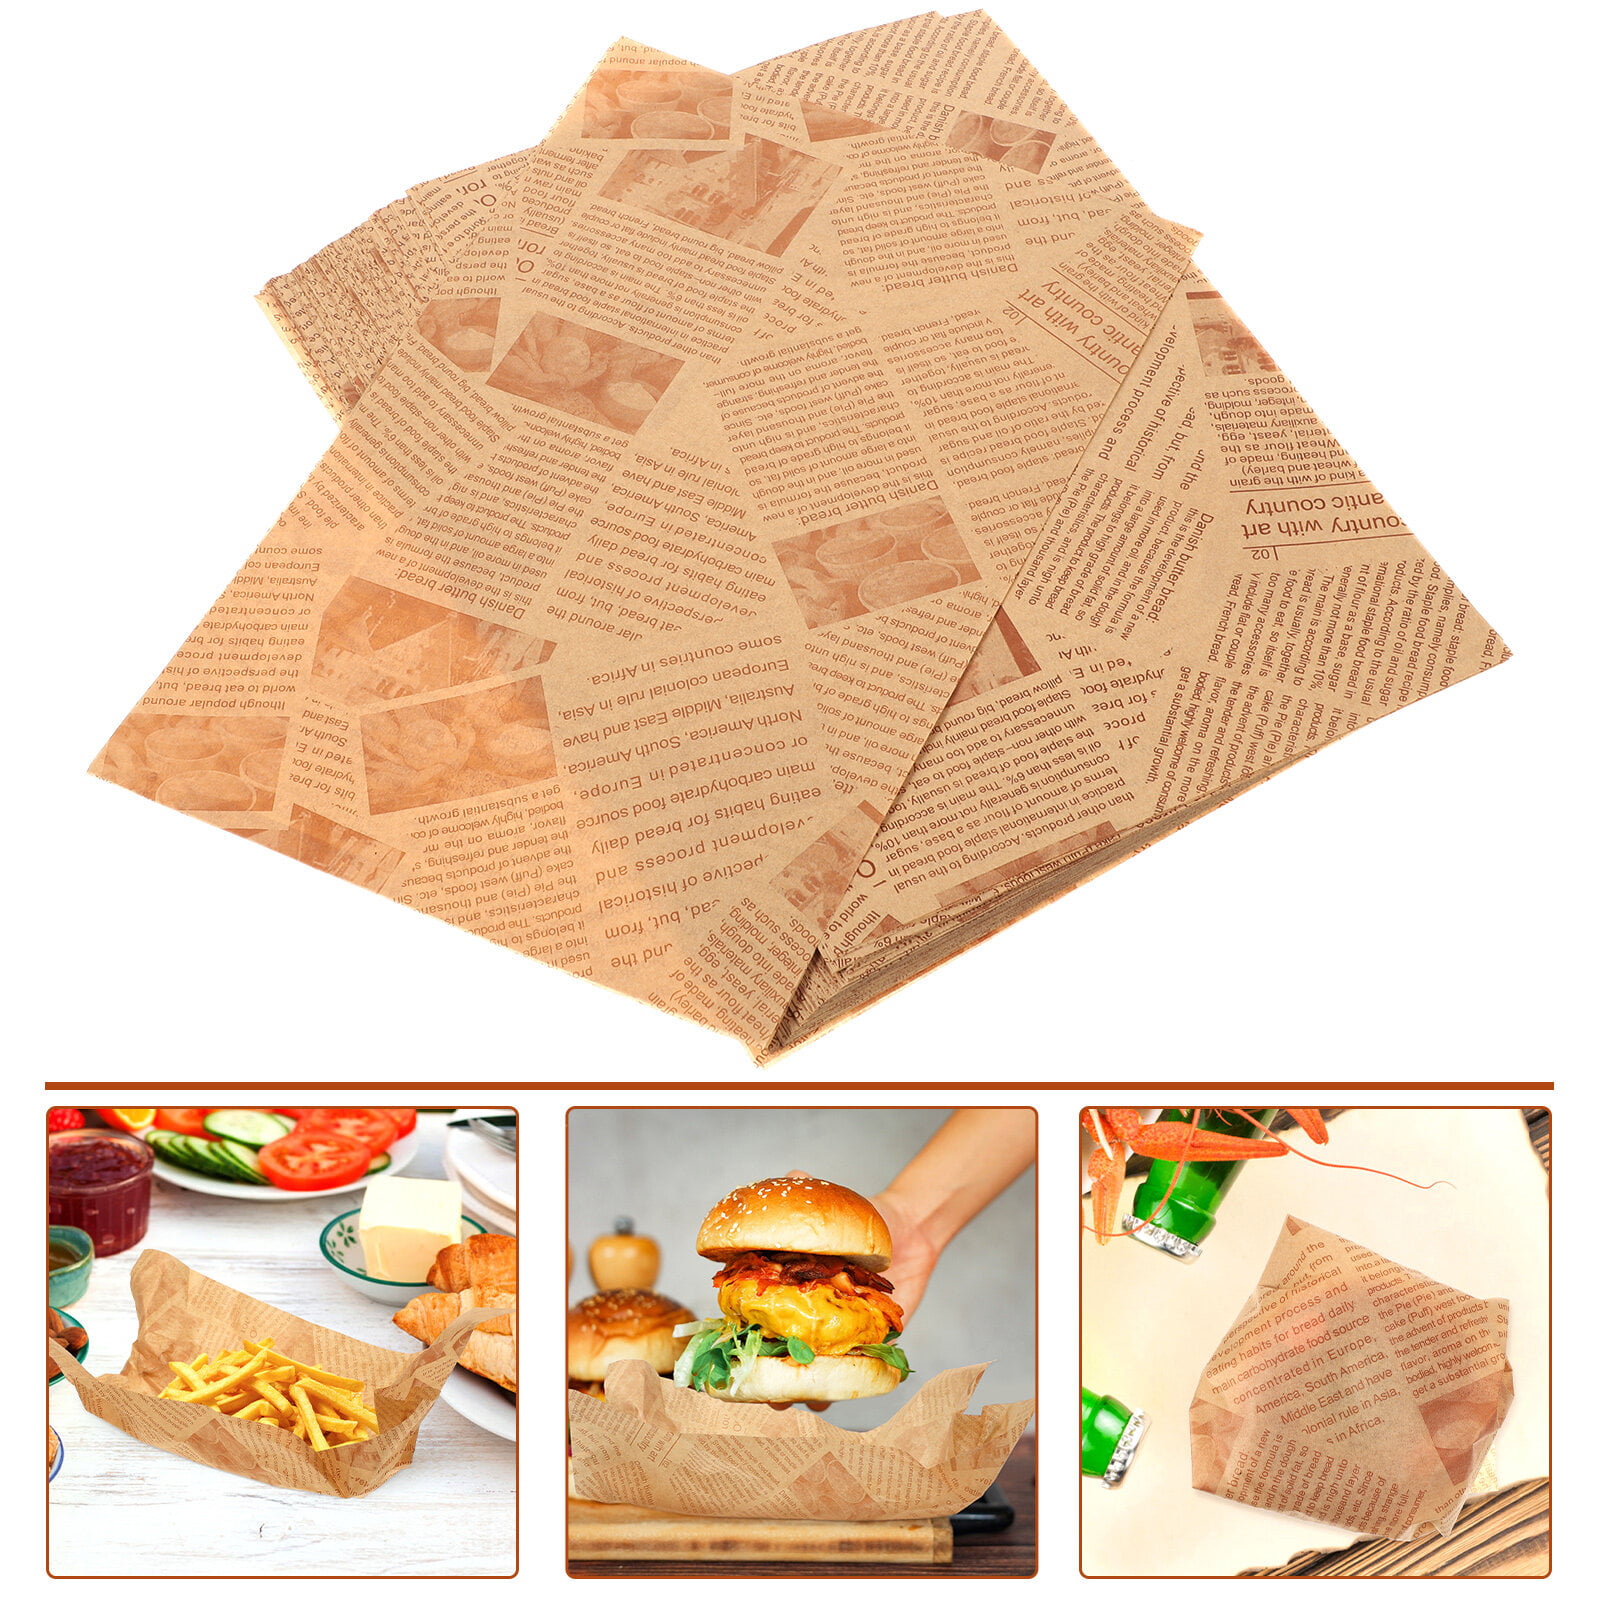 Sjenert 50Pcs/Set Sandwich Wrapping Paper, Vintage Newspaper Toast Baking Bread Food Wrapping Parchment Paper Grease Resistance Papers Home Kitchen